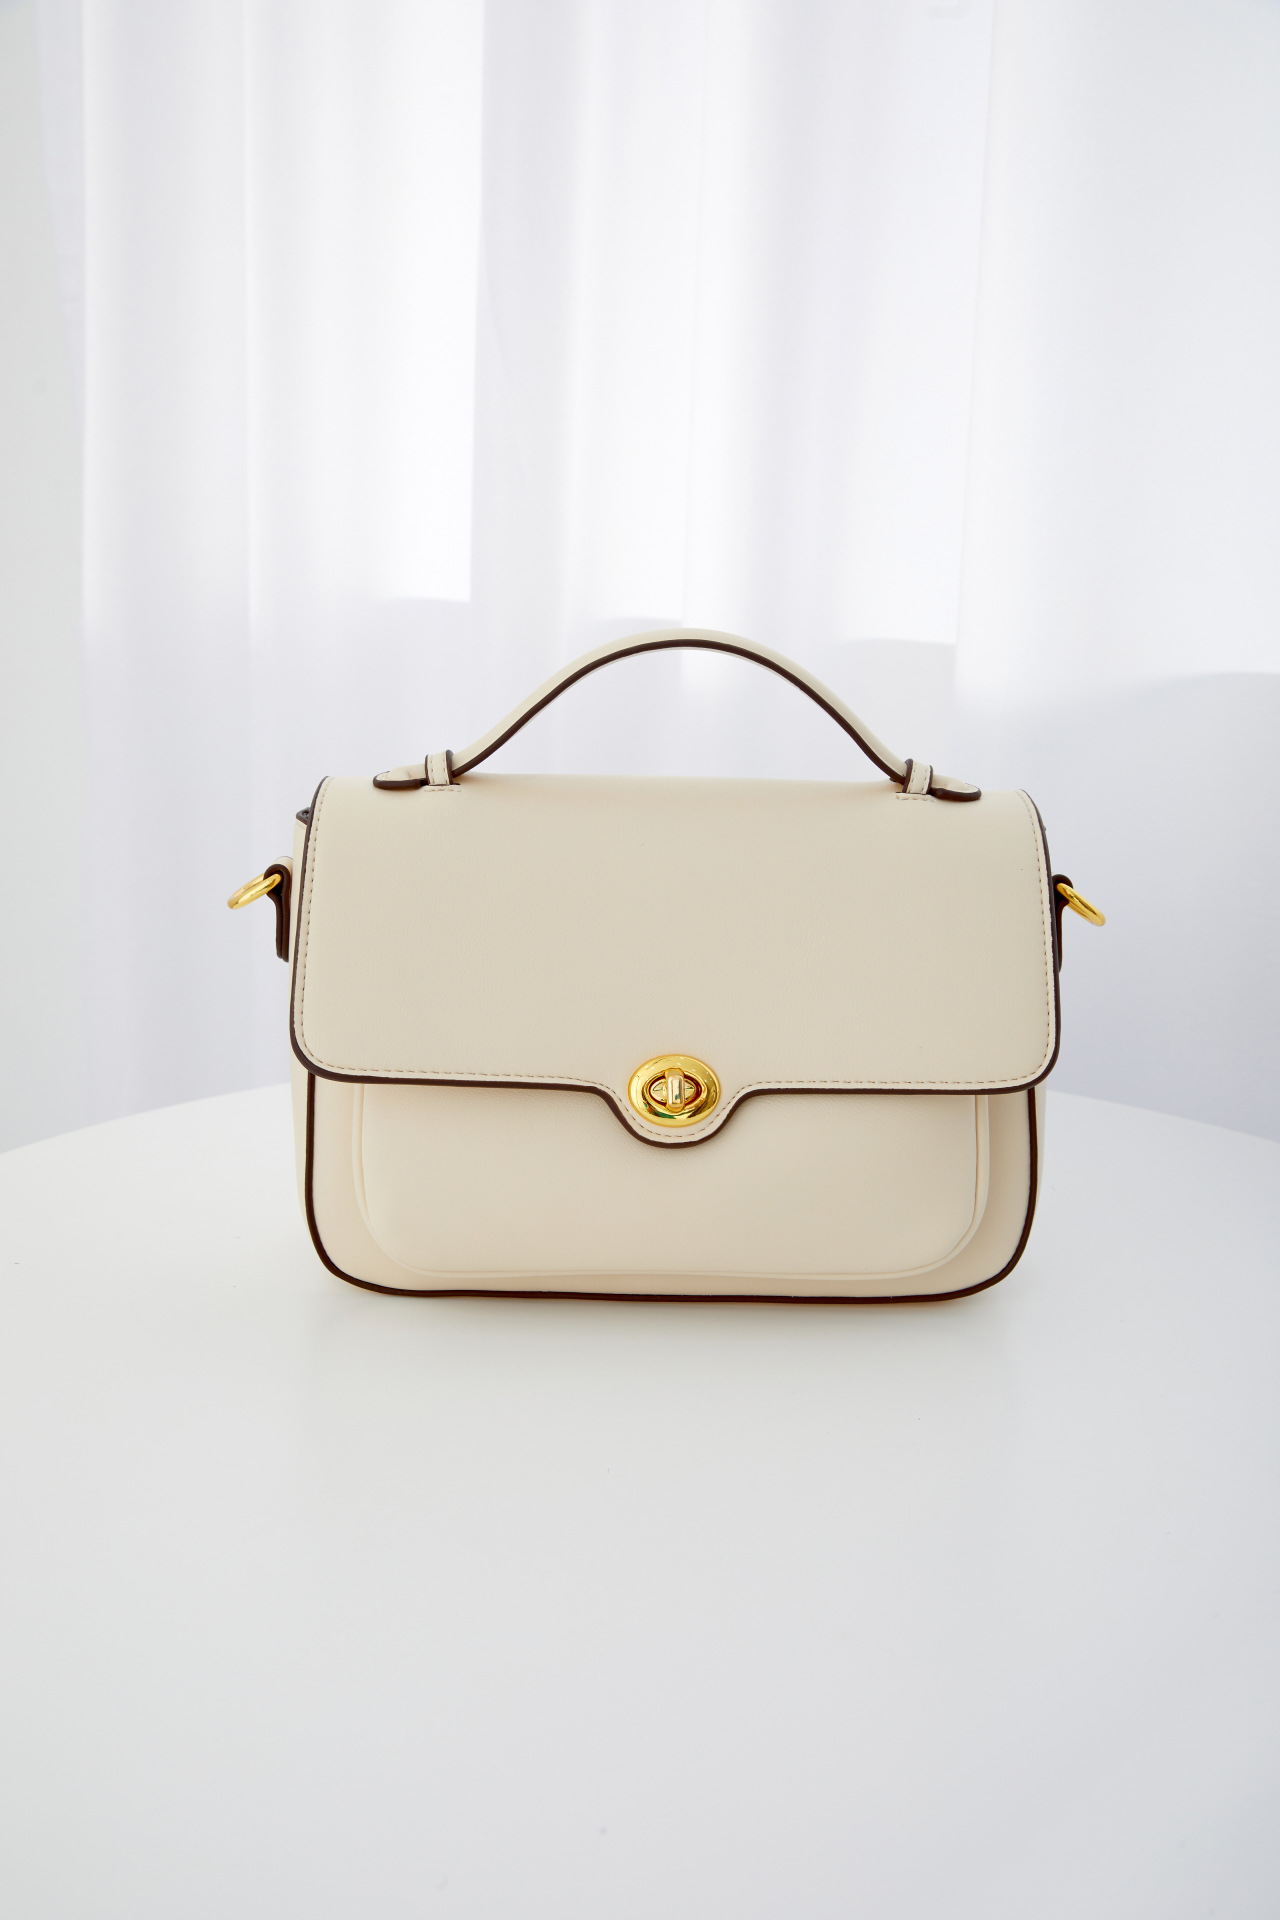 9106 Trend Classic All-Match Simple Fashion Dignified Goddess Popular One-Shoulder Crossboby Bag